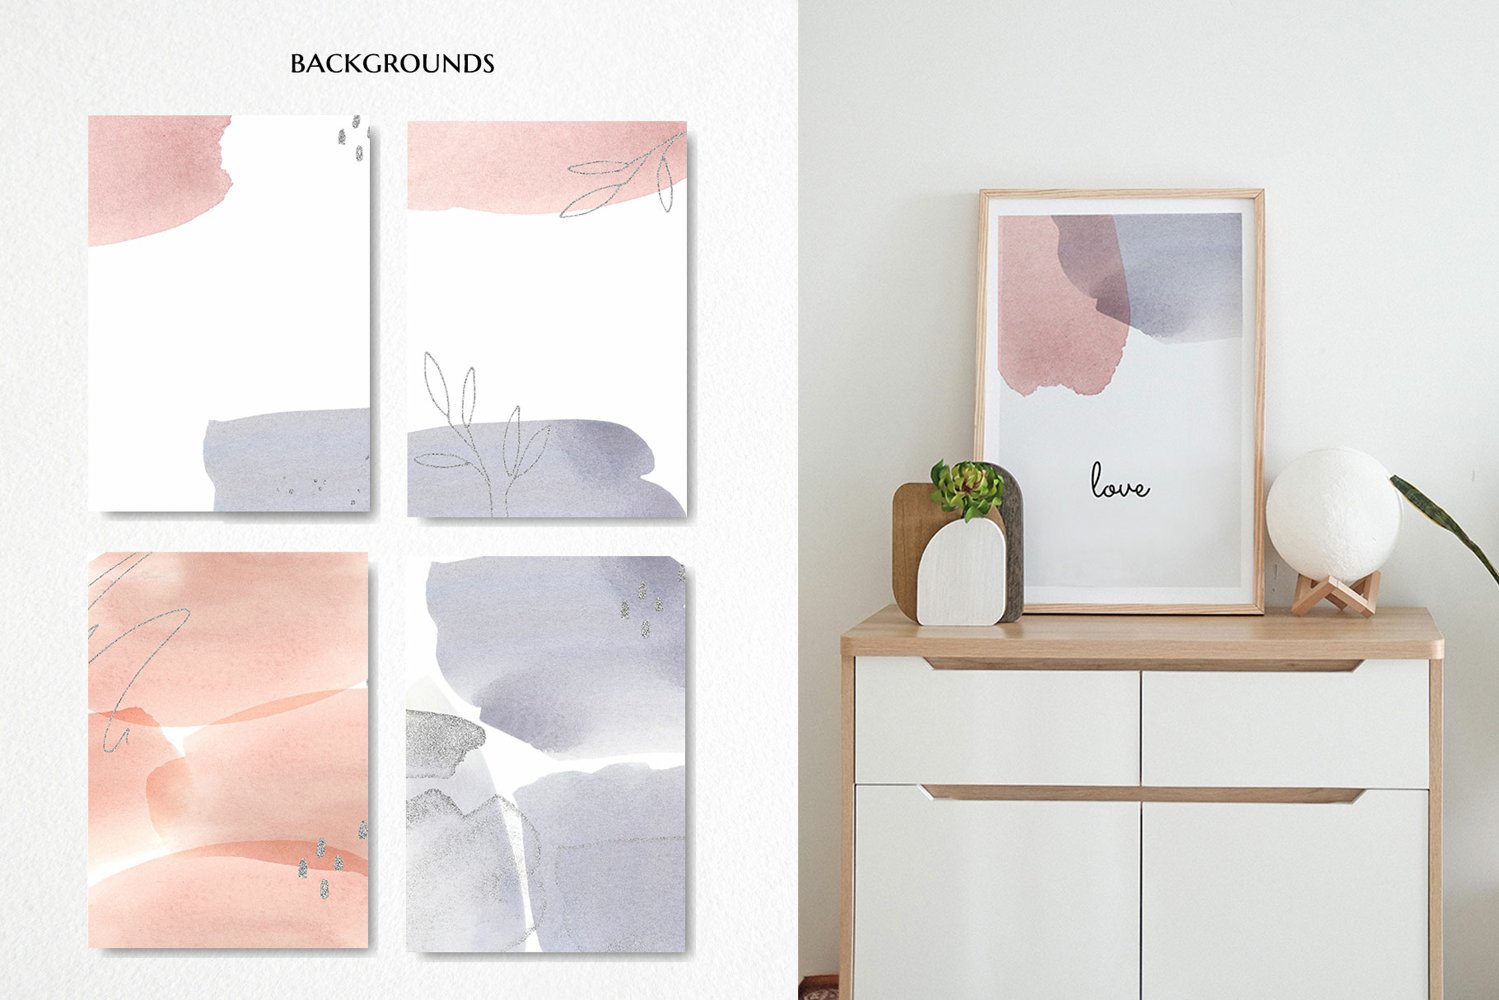 Watercolor backgrounds in pastel colors.